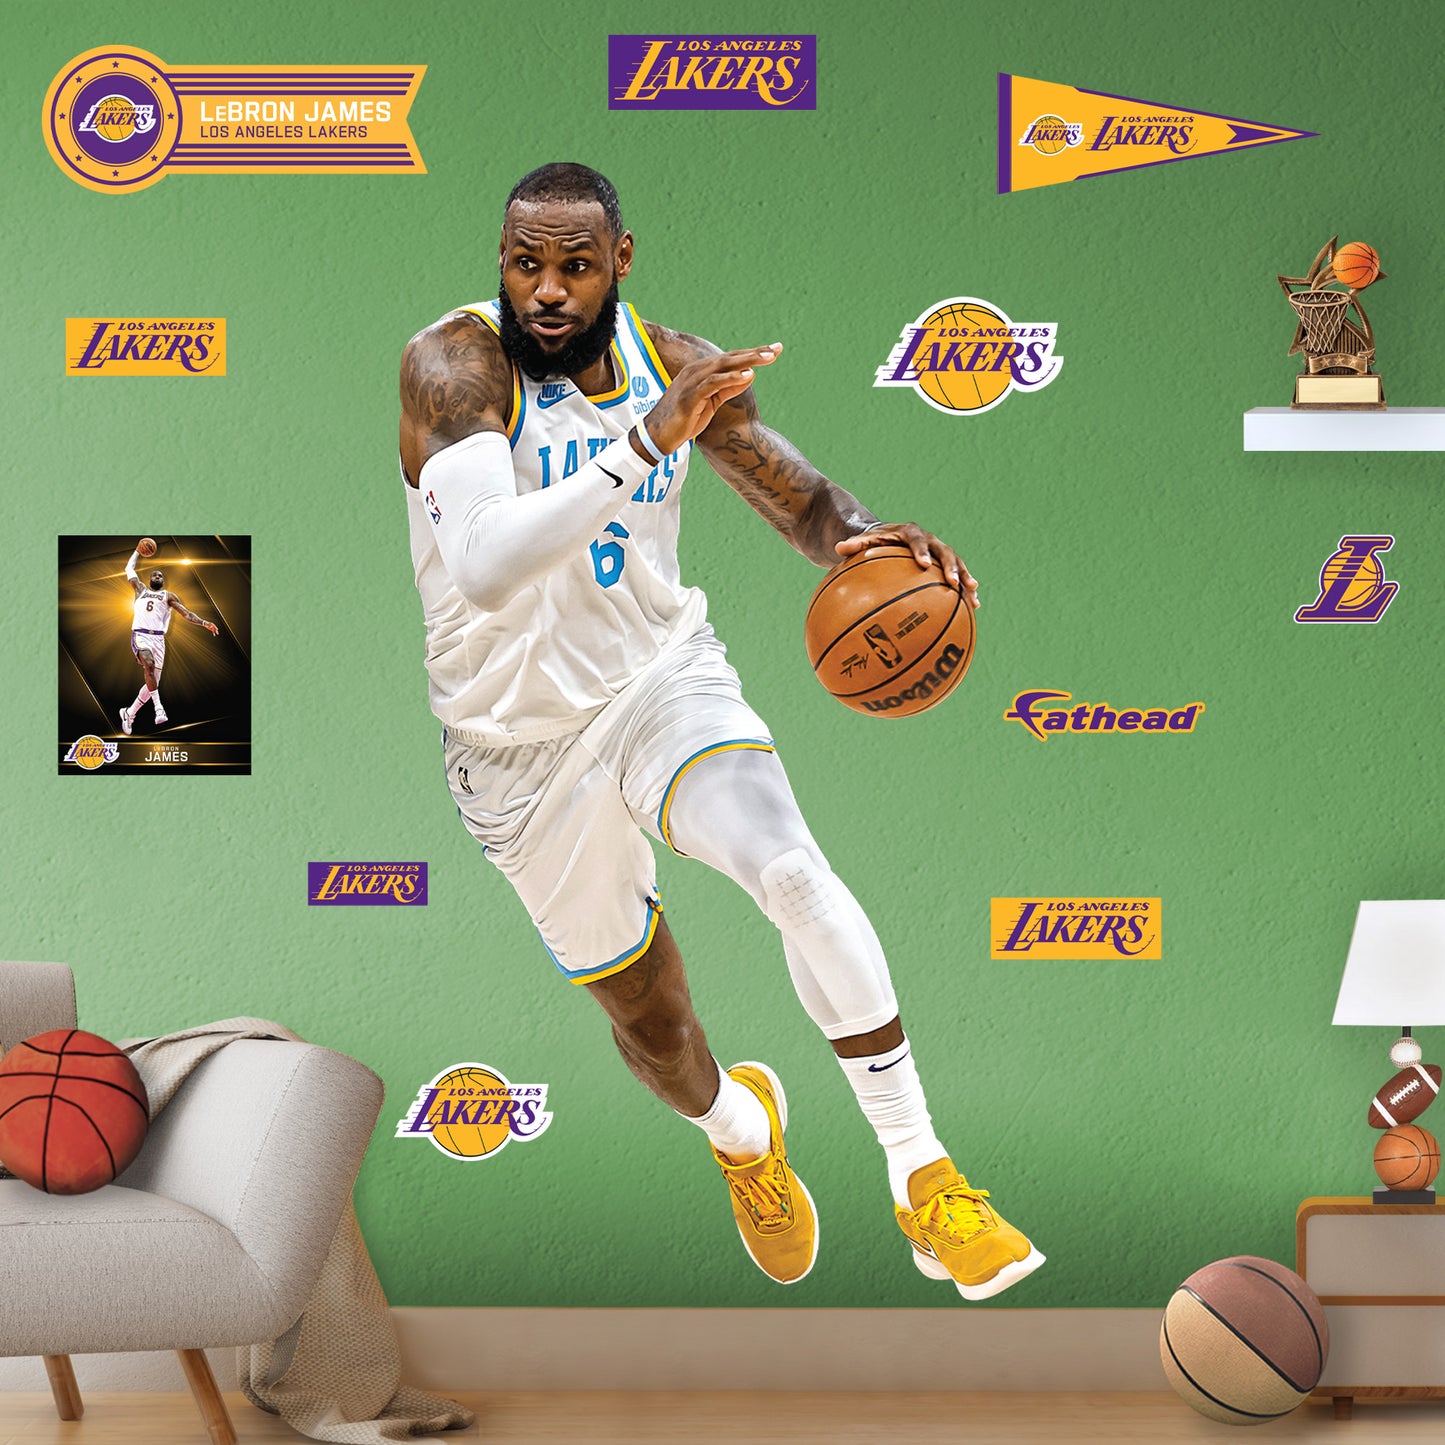 Los Angeles Lakers: LeBron James 2023 All-Time Scoring Leader Shot -  Officially Licensed NBA Removable Adhesive Decal